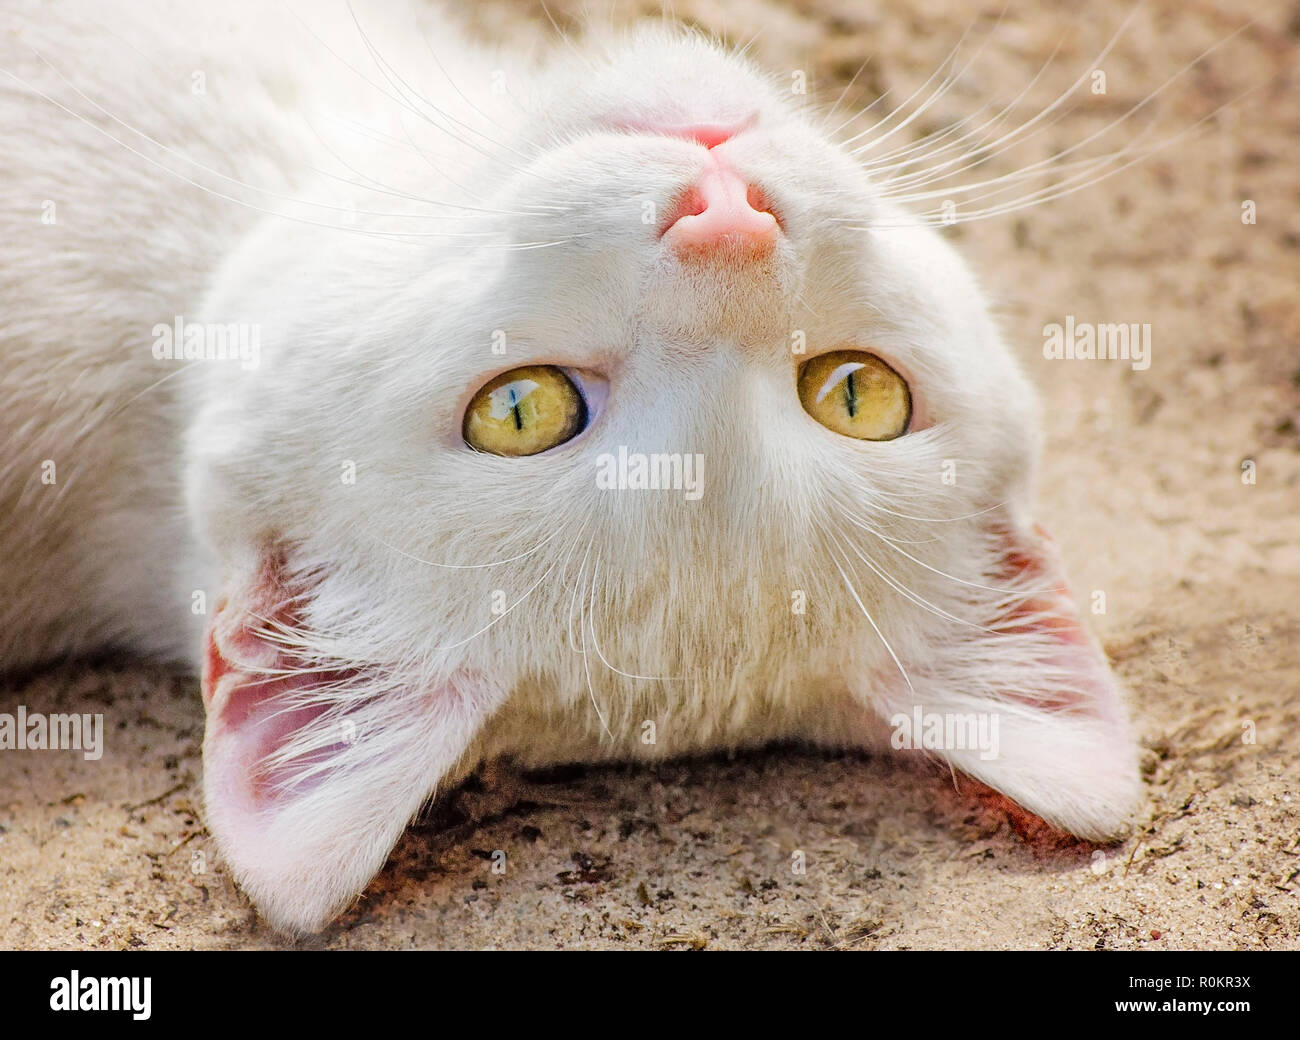 Henry, a one-year-old domestic short-haired cat, rolls over in the dirt, March 6, 2017, in Coden, Alabama. Stock Photo